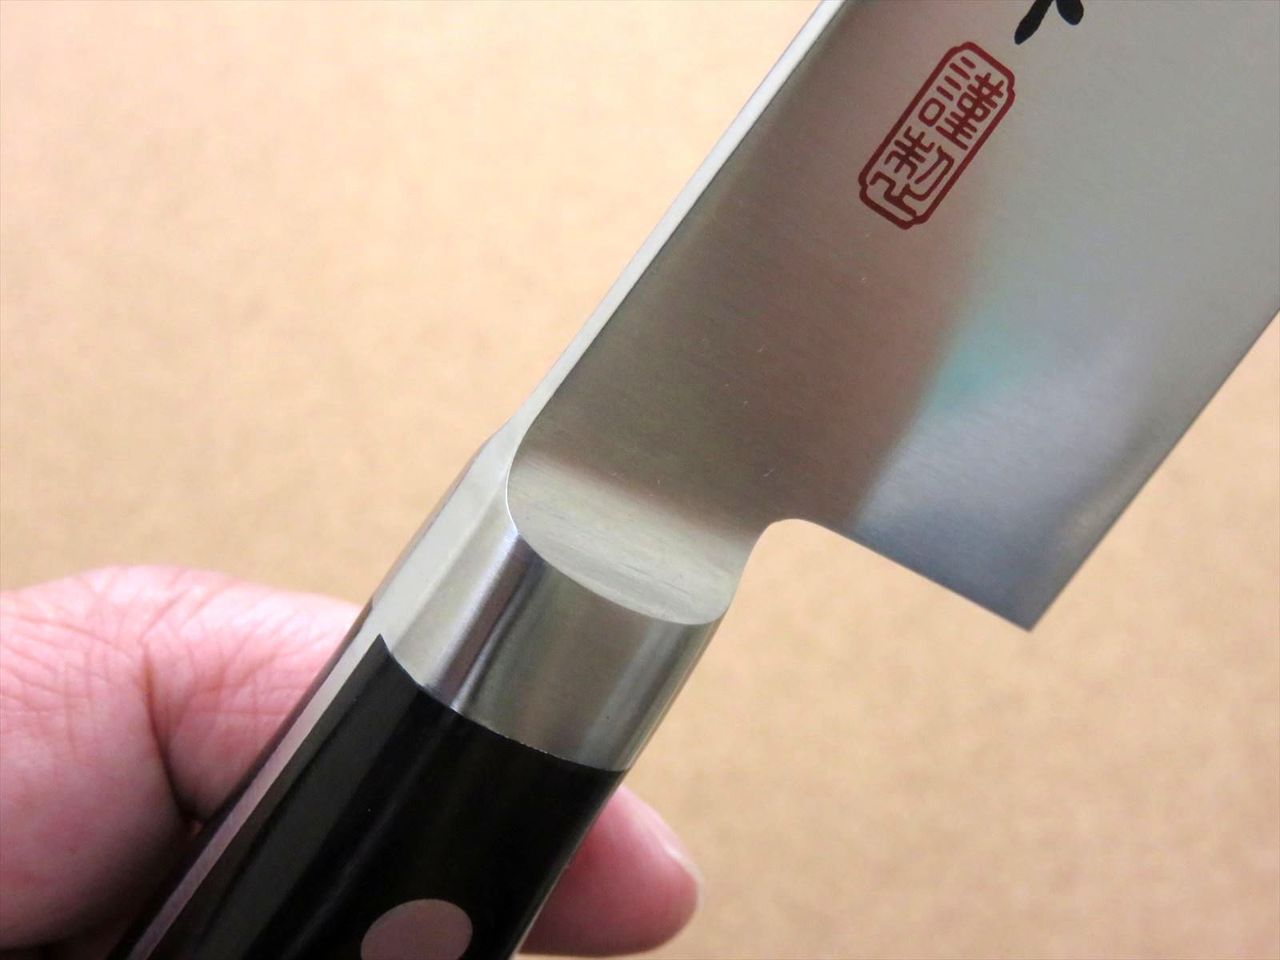 Japanese Professional Cook Kitchen Gyuto Chef's Knife 210mm 8 in VG-1 SEKI JAPAN